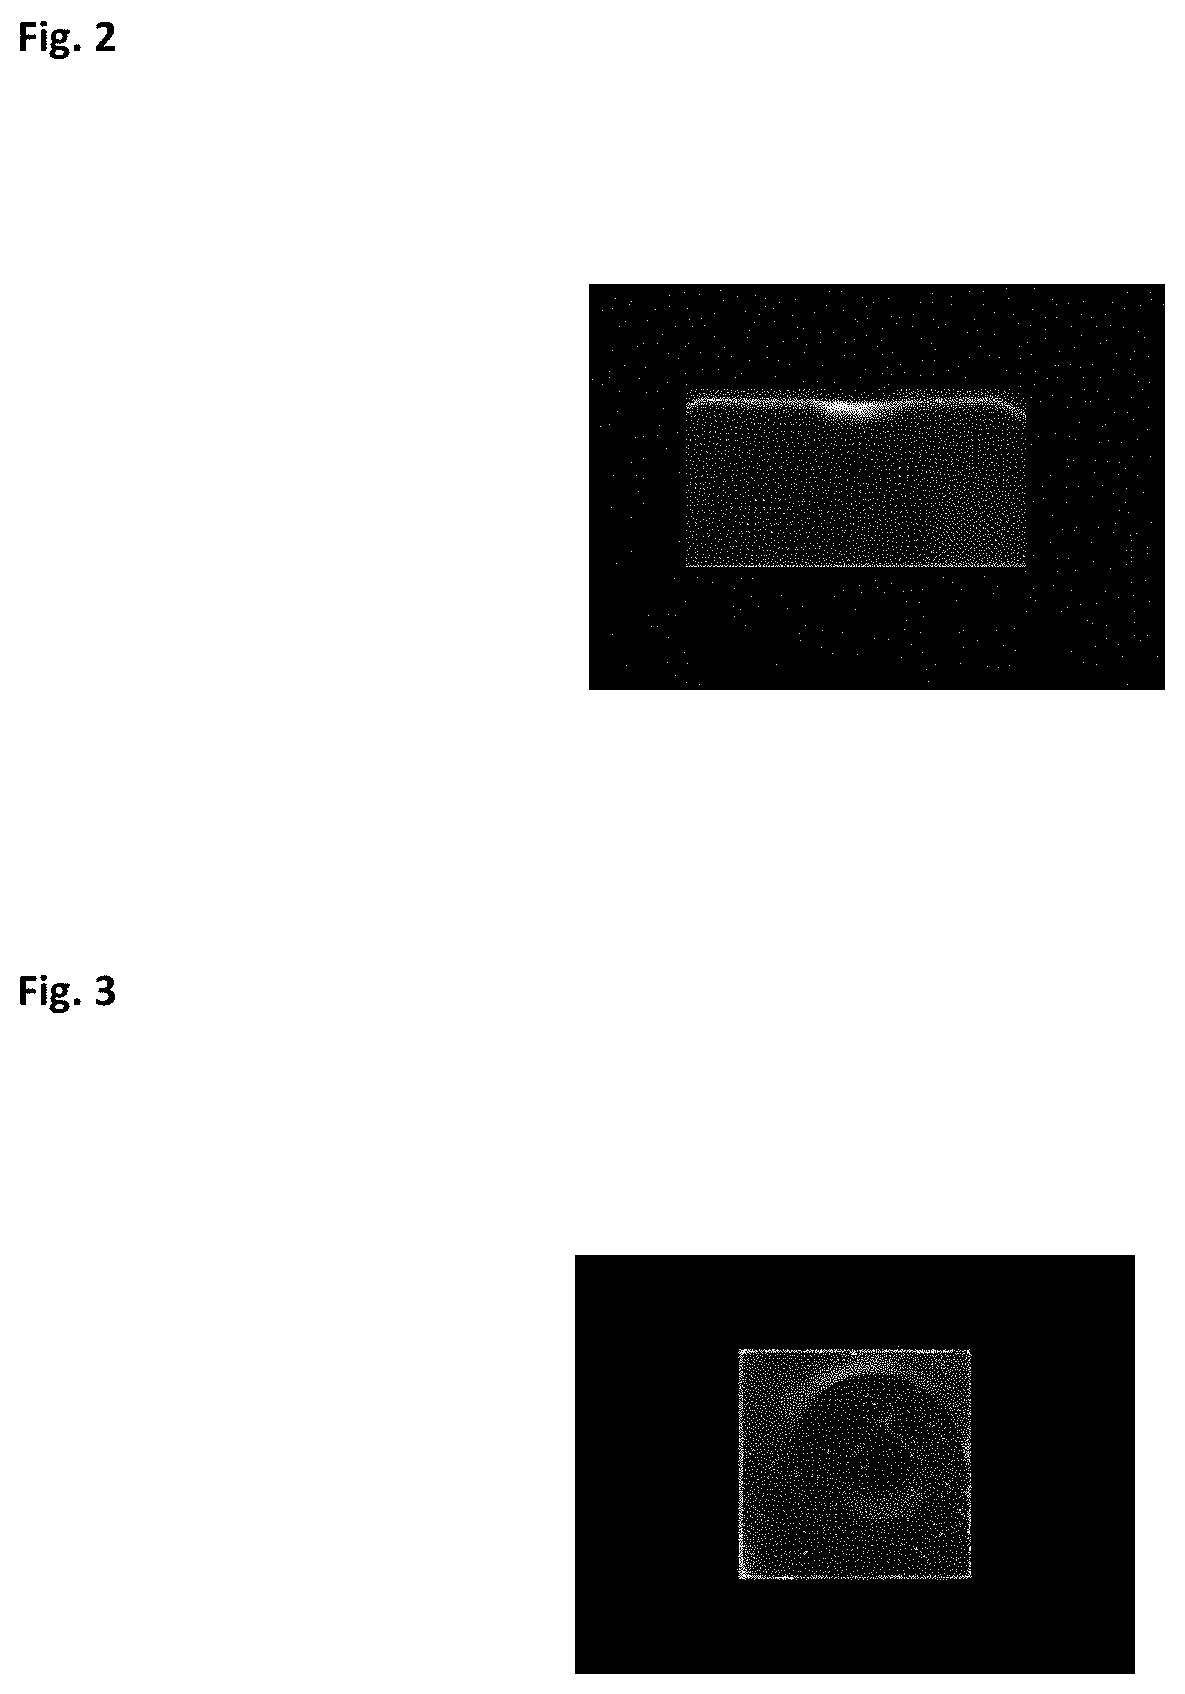 Methods of fabricating synthetic diamond materials using microwave plasma activated chemical vapour deposition techniques and products obtained using said methods